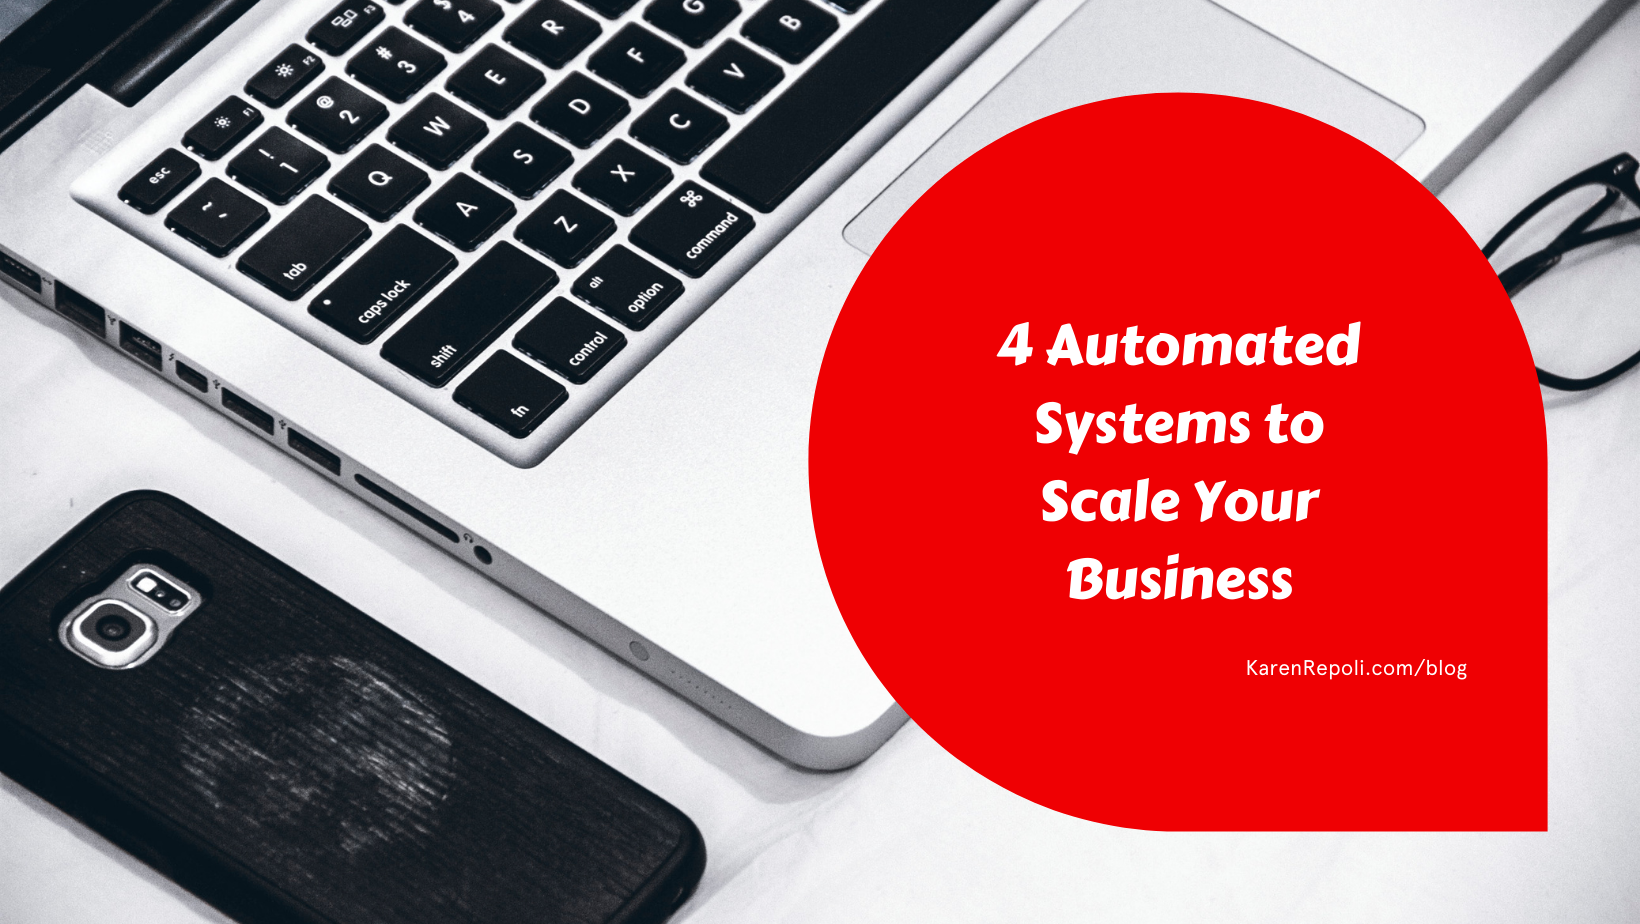 automated systems